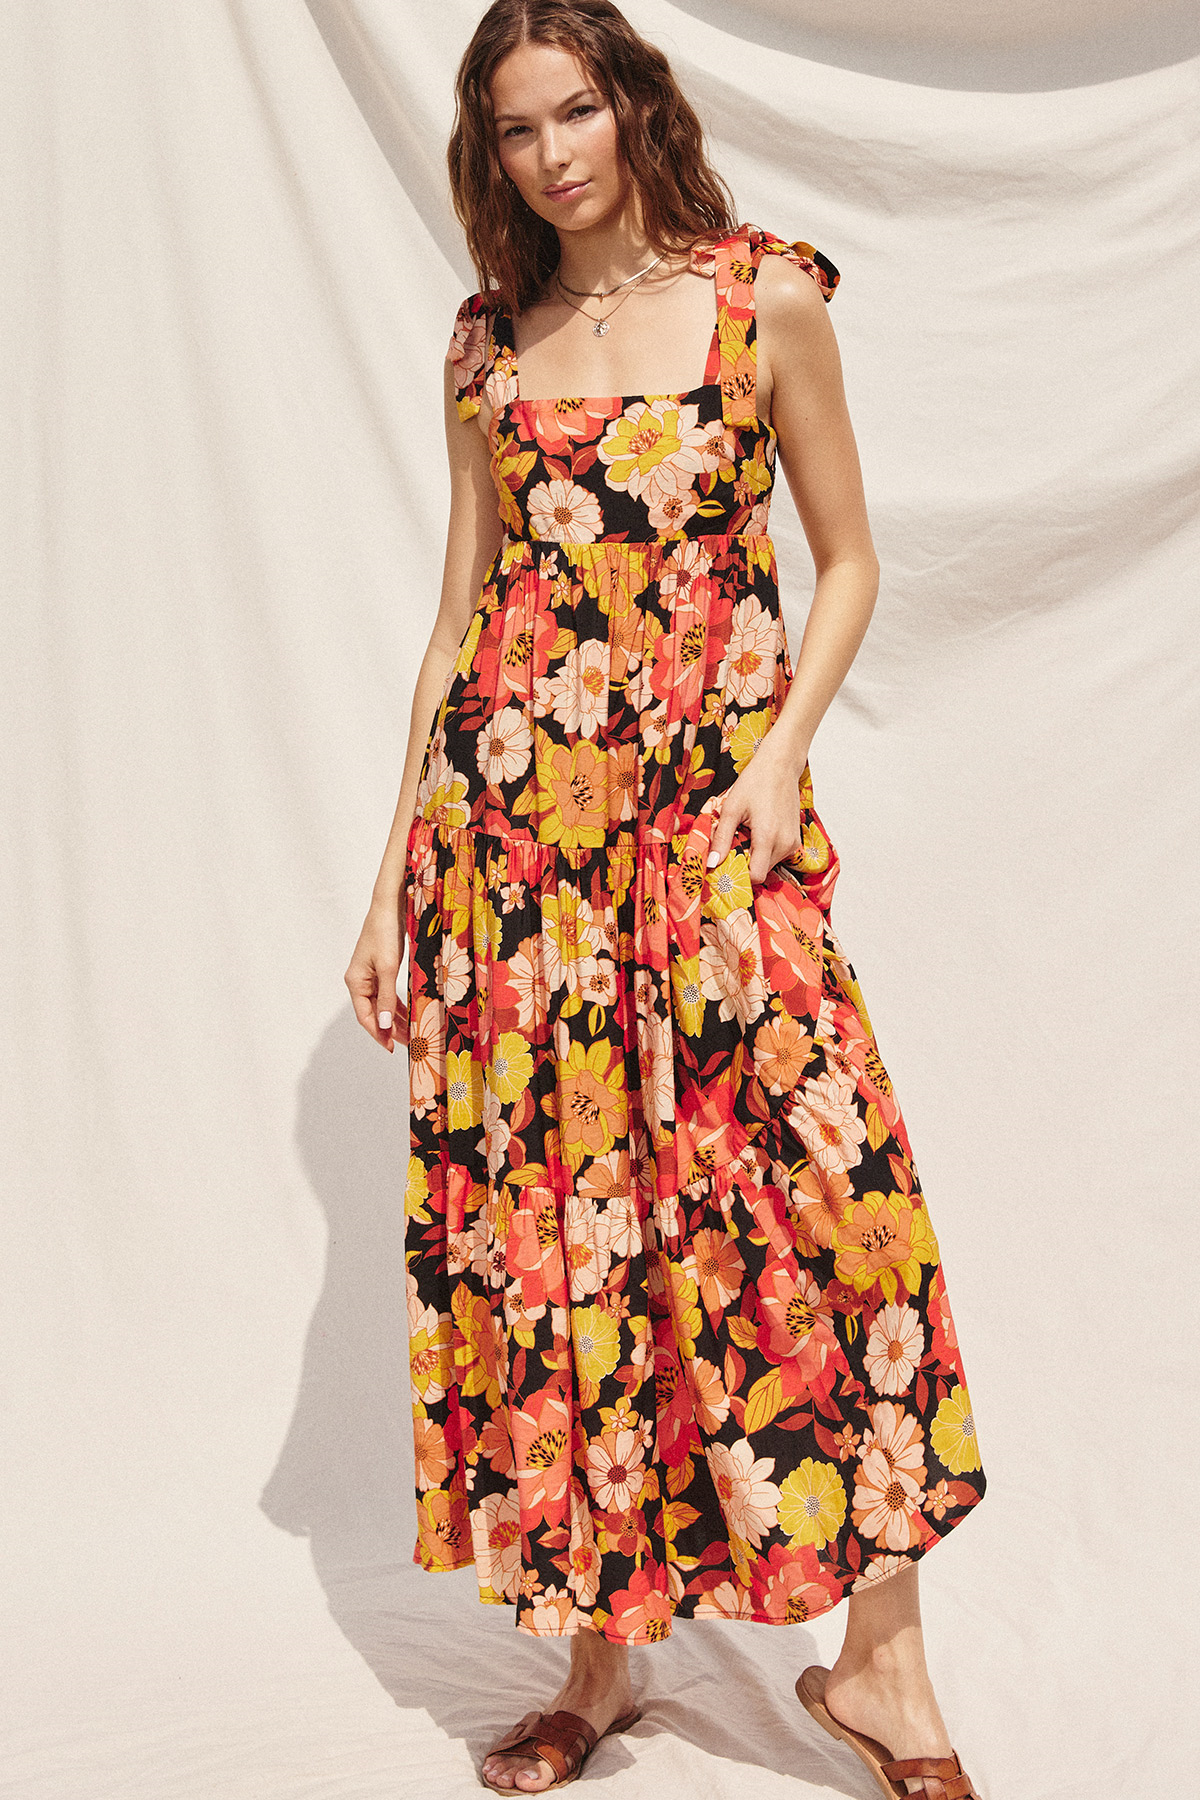 “Chase the sun” Maxi Tie Dress